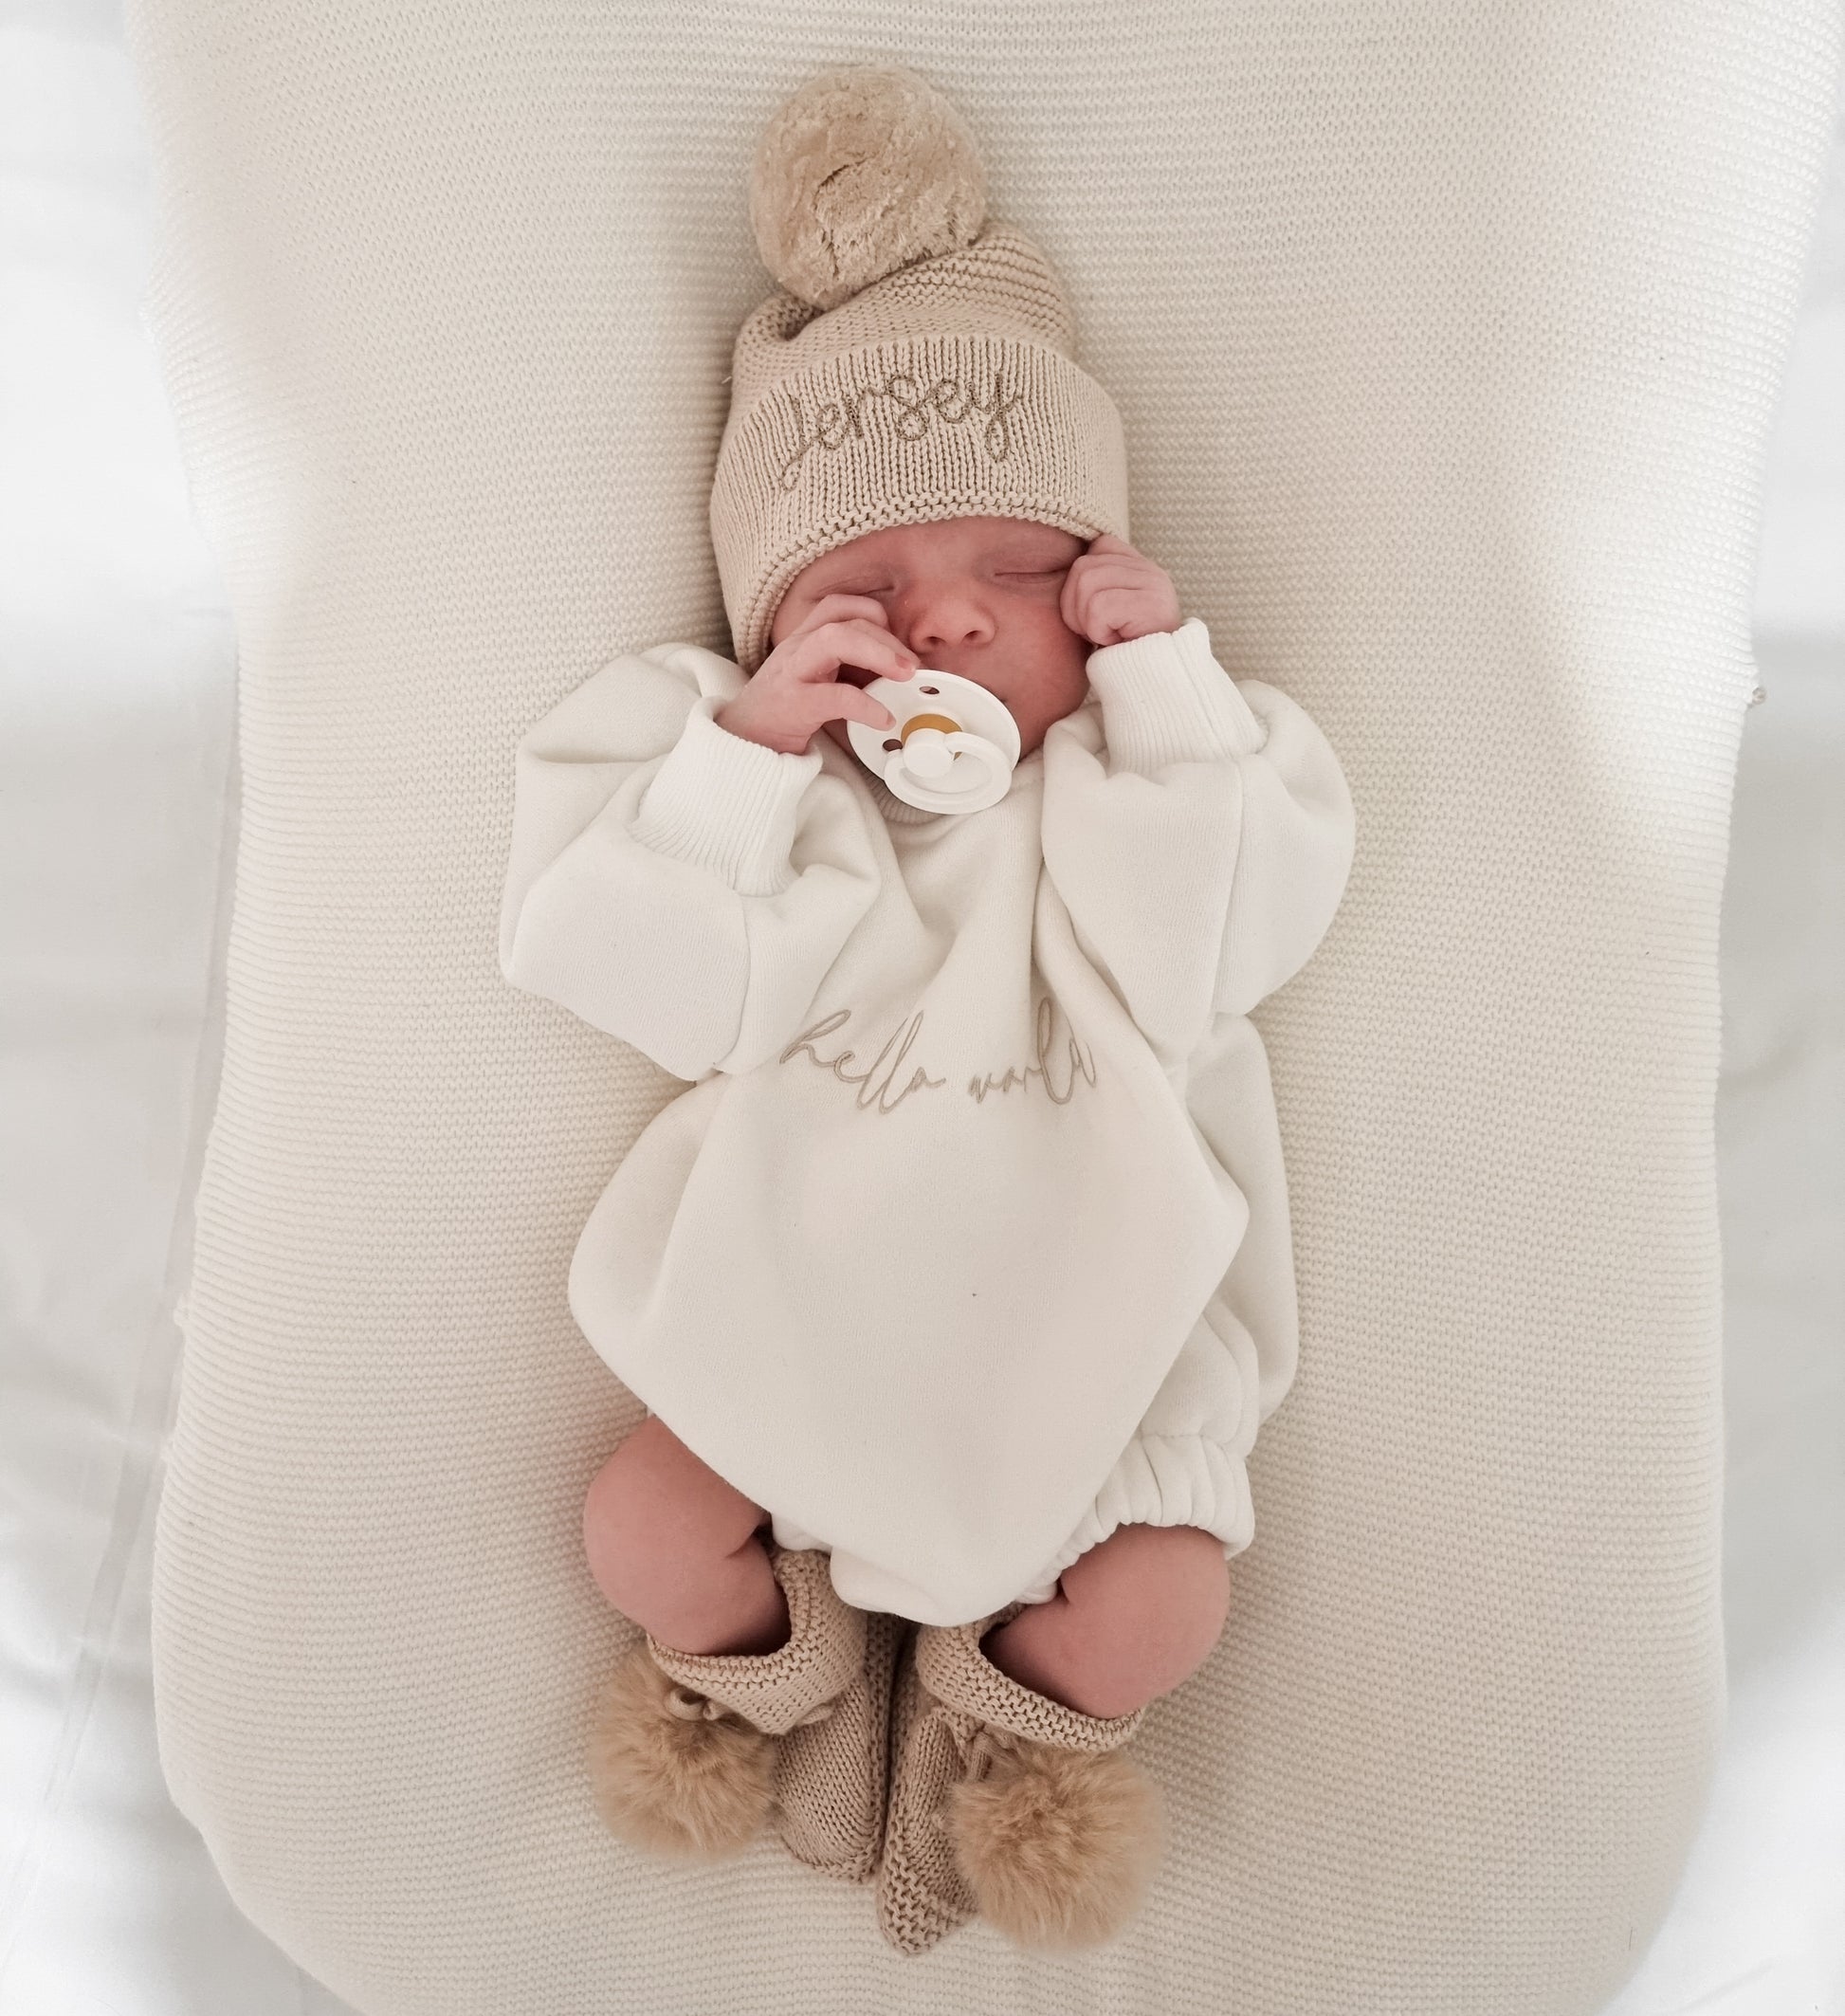 newborn baby first outfit  - hello world romper